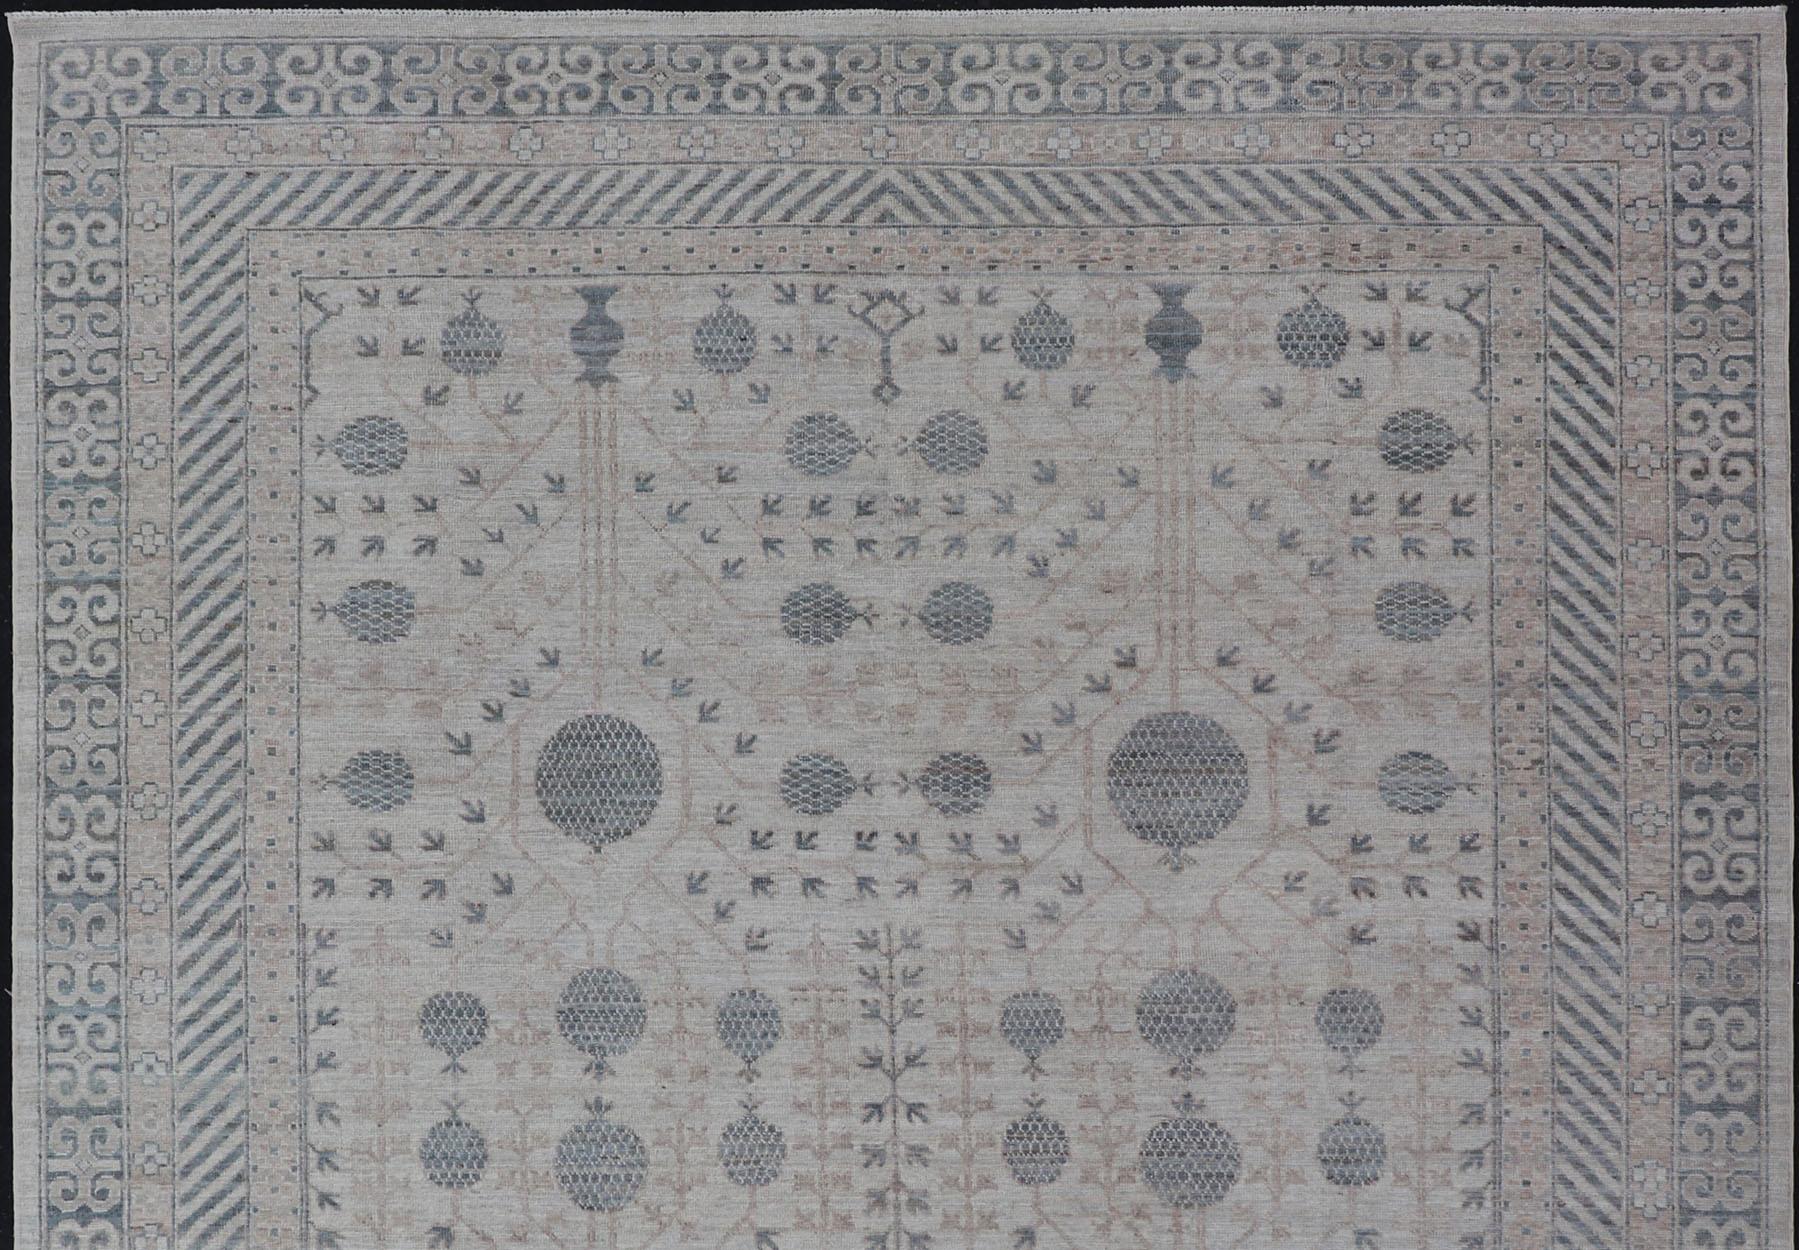 Modern Tribal Khotan Rug in Shades of Cream, Tan, and Light Teal For Sale 1